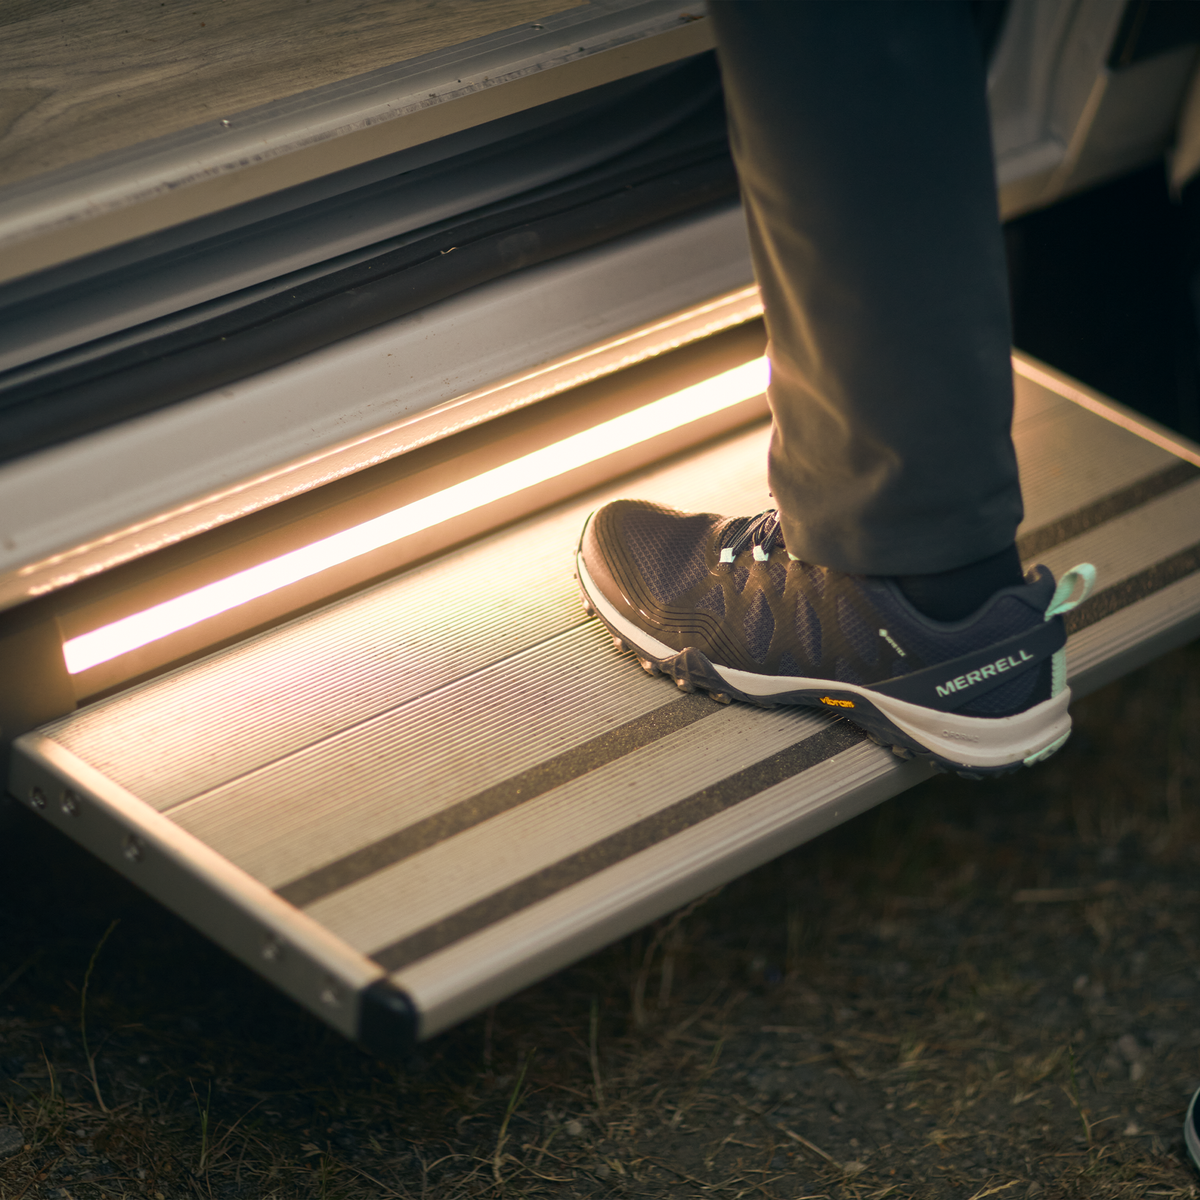 A close-up of someone stepping on a caravan step with a Thule LED kit for Slide-Out Step Ducato.